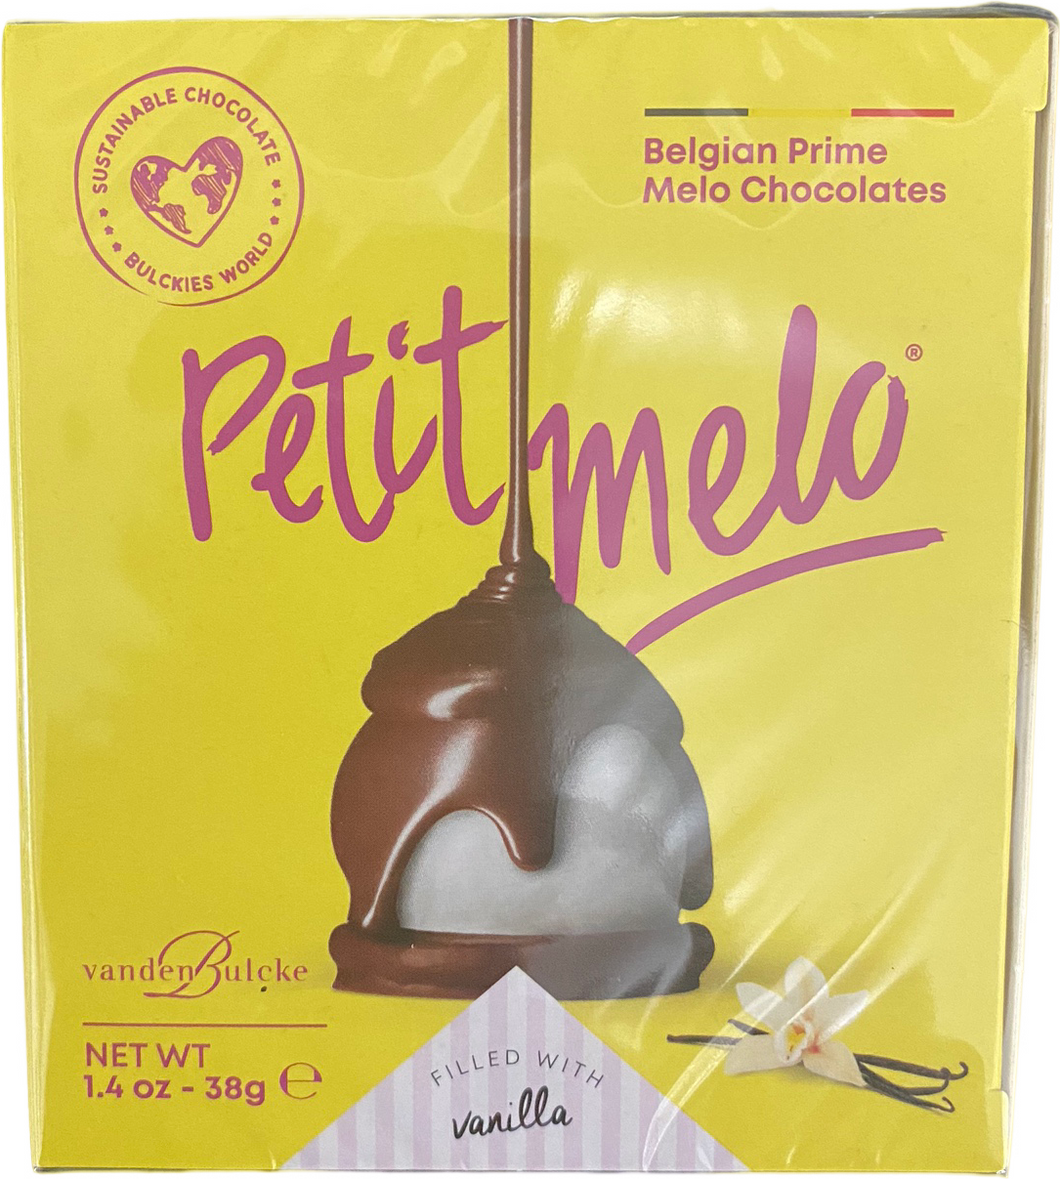 Petit Melo - Marshmallow with coated chocolate and cookie　プチメロ　ベルギのお菓子が一つに